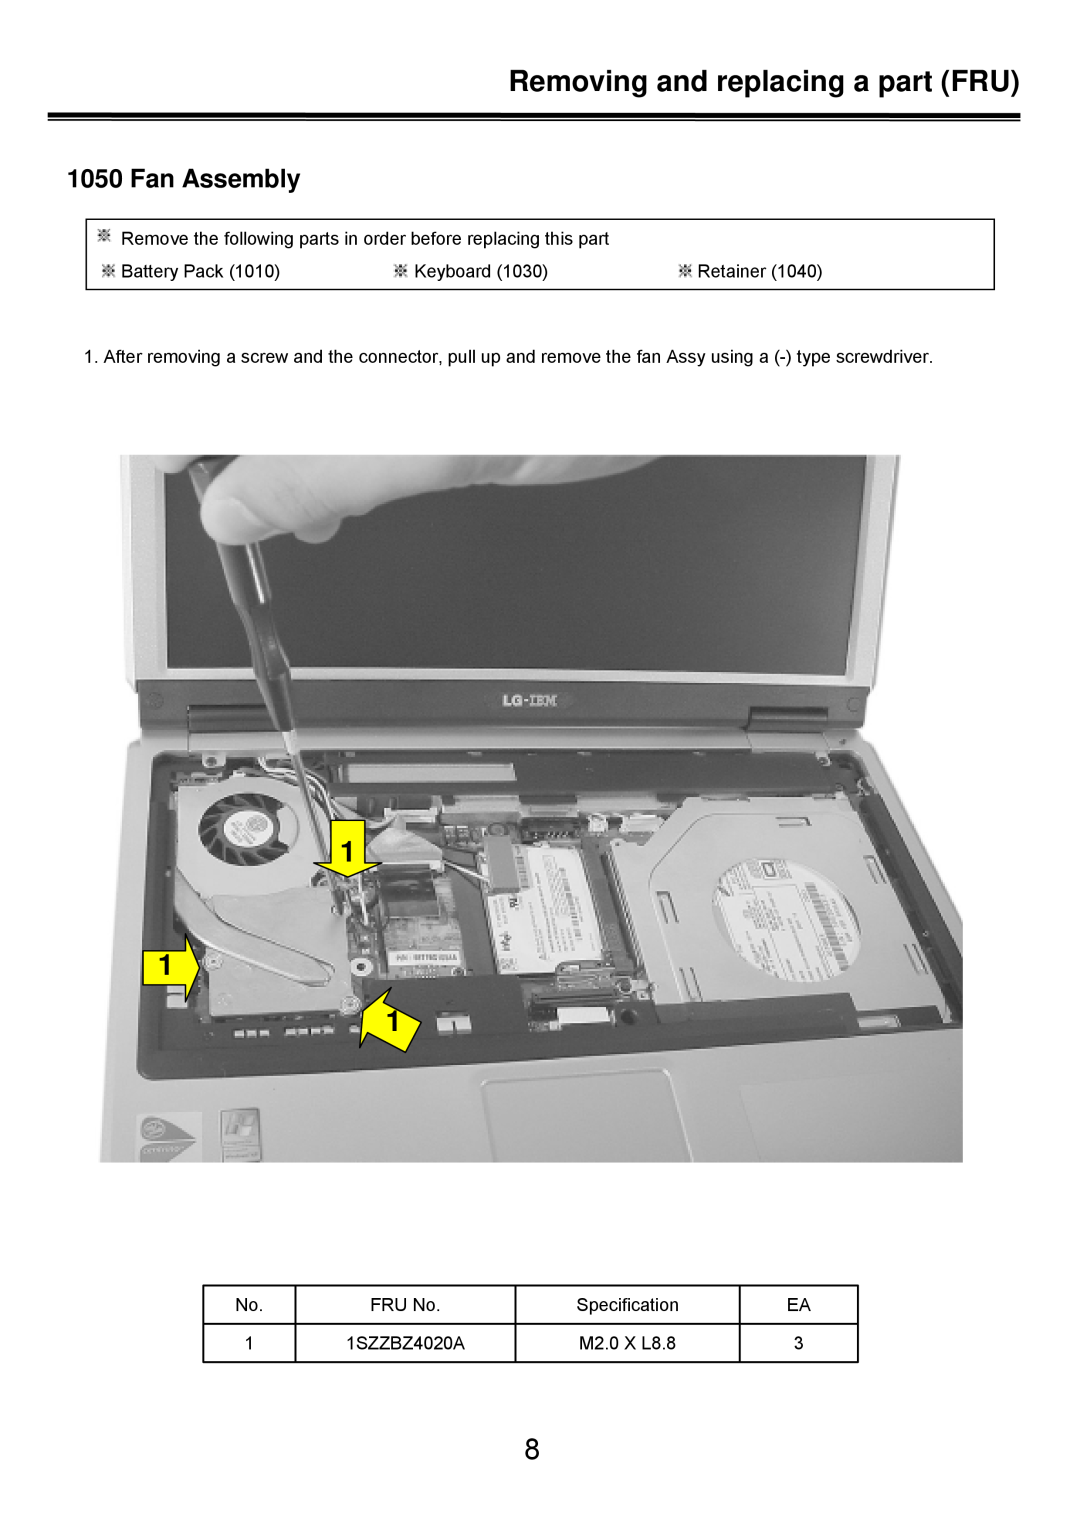 LG Electronics LS50 service manual Fan Assembly, Removing and replacing a part FRU 